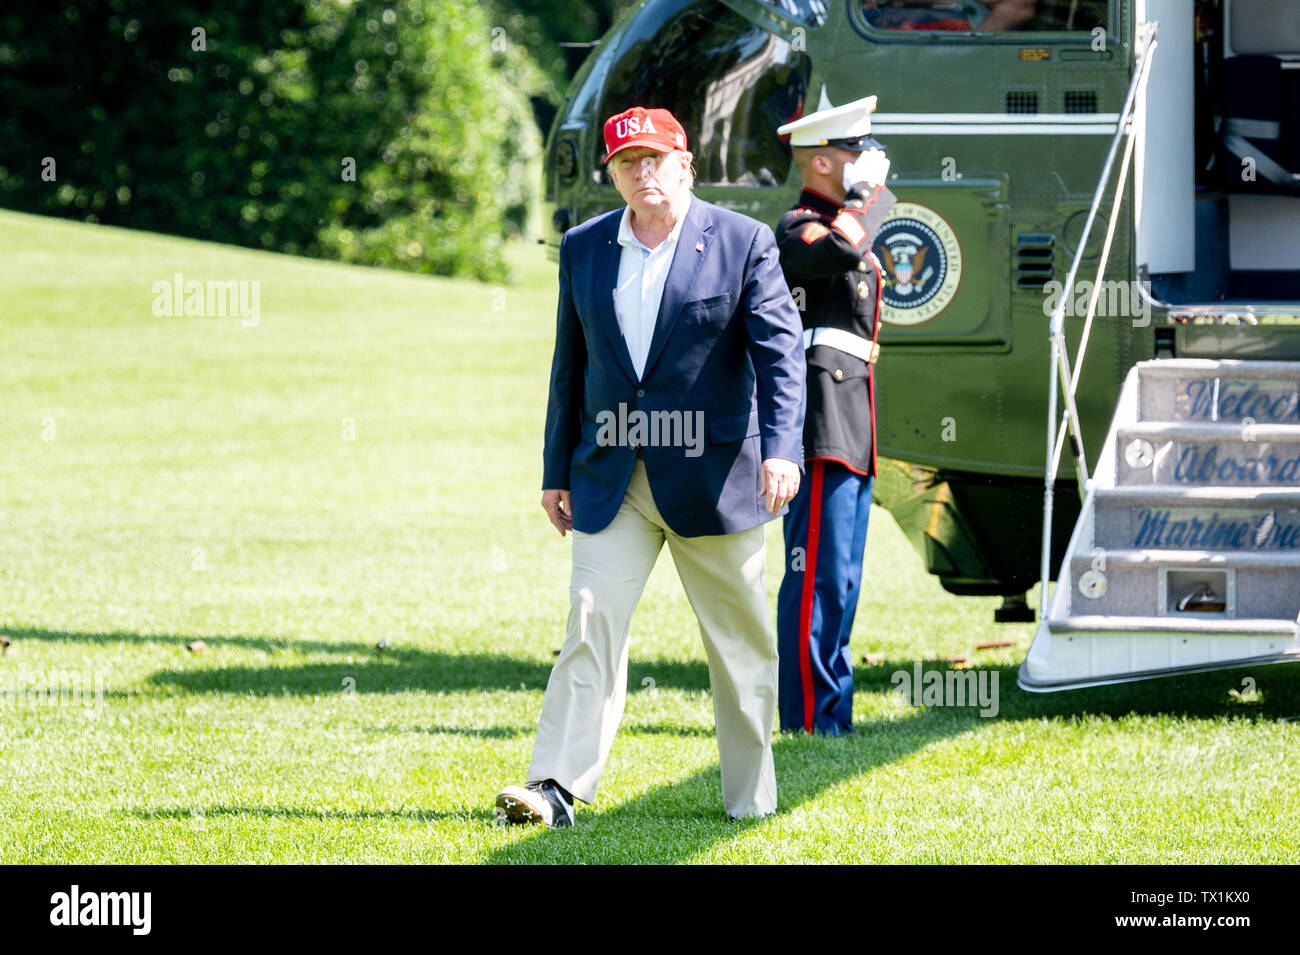 President Donald Trump returns to the White House (Washington, DC) on the afternoon of June 23, 2019. Stock Photo